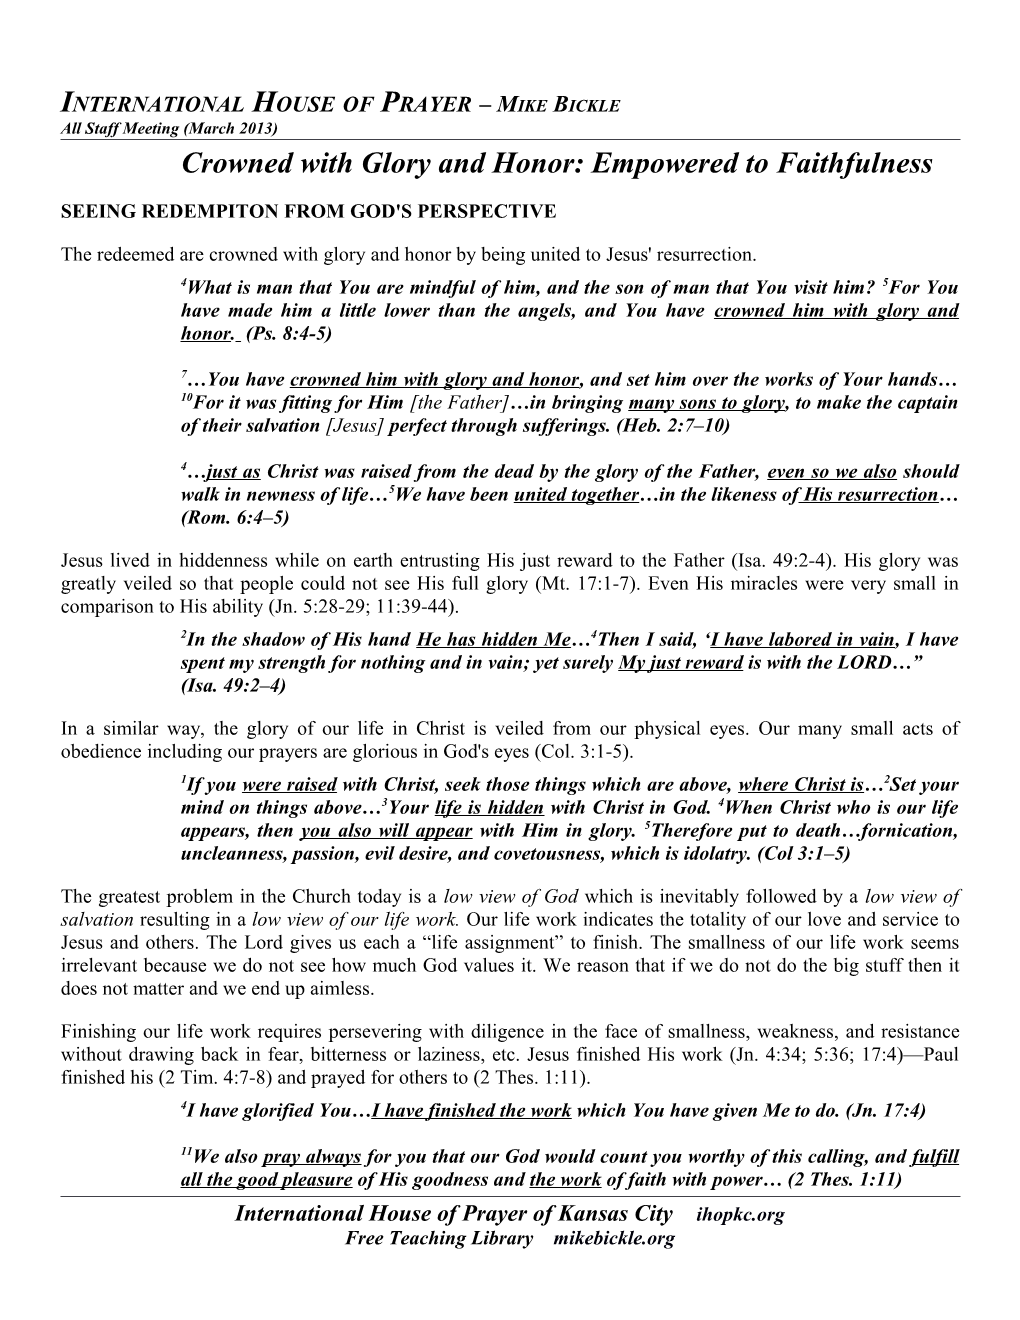 Crowned with Glory and Honor: Empowered to Faithfulness Page 2